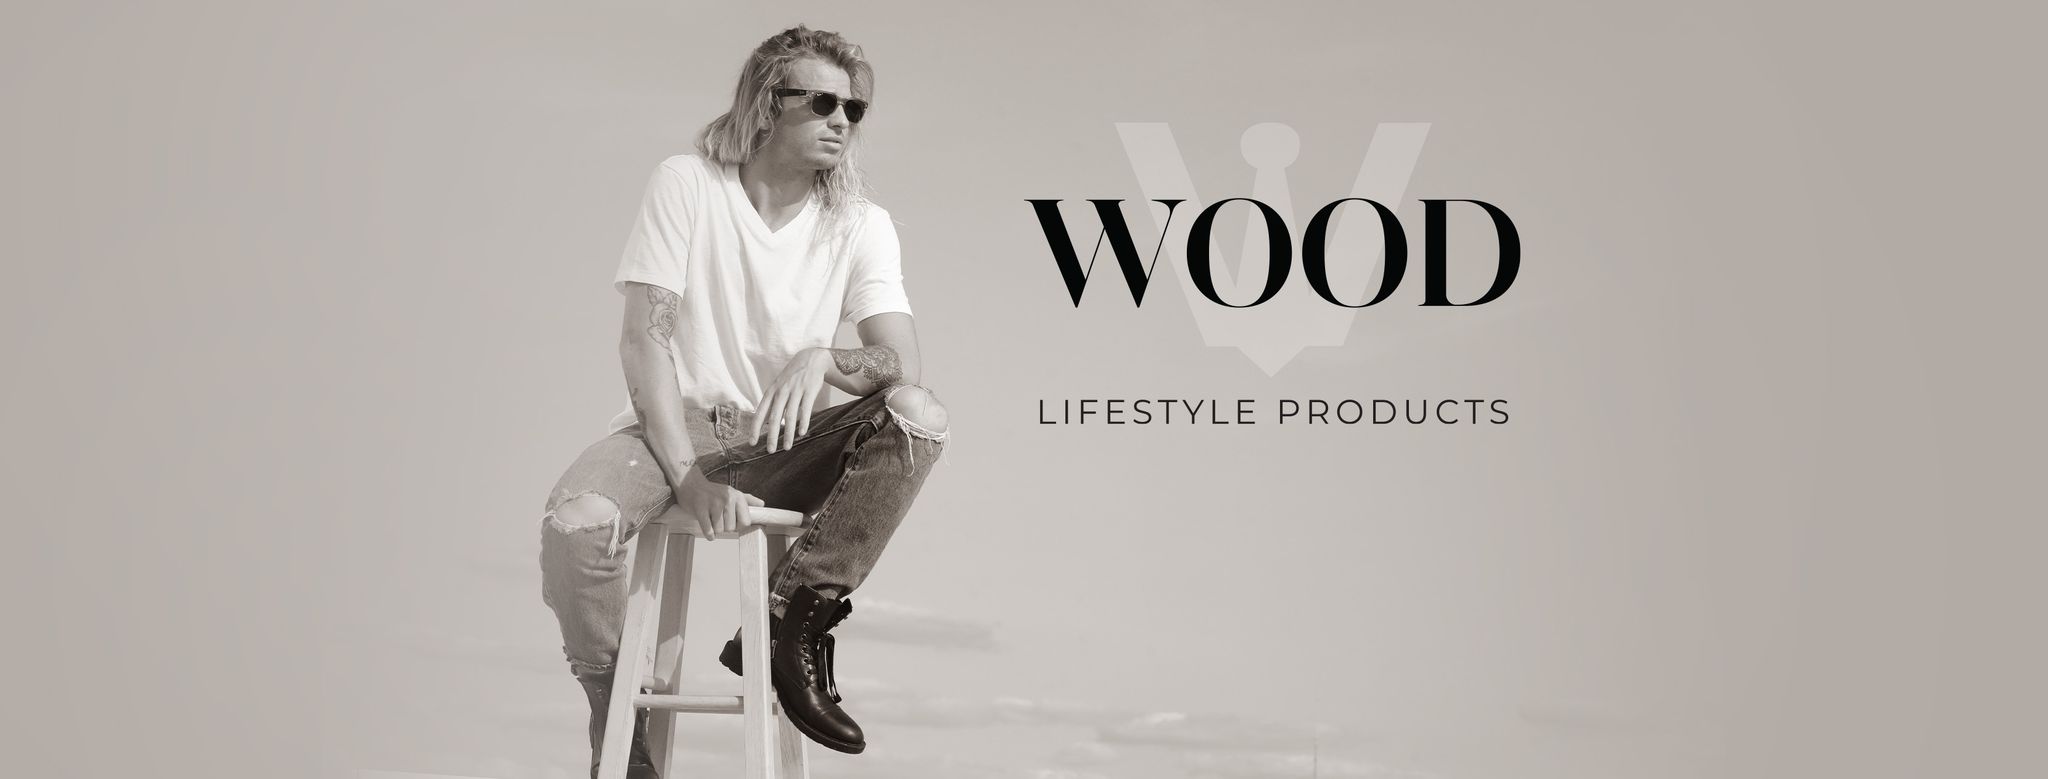 WOOD LIFESTYLE PRODUCTS